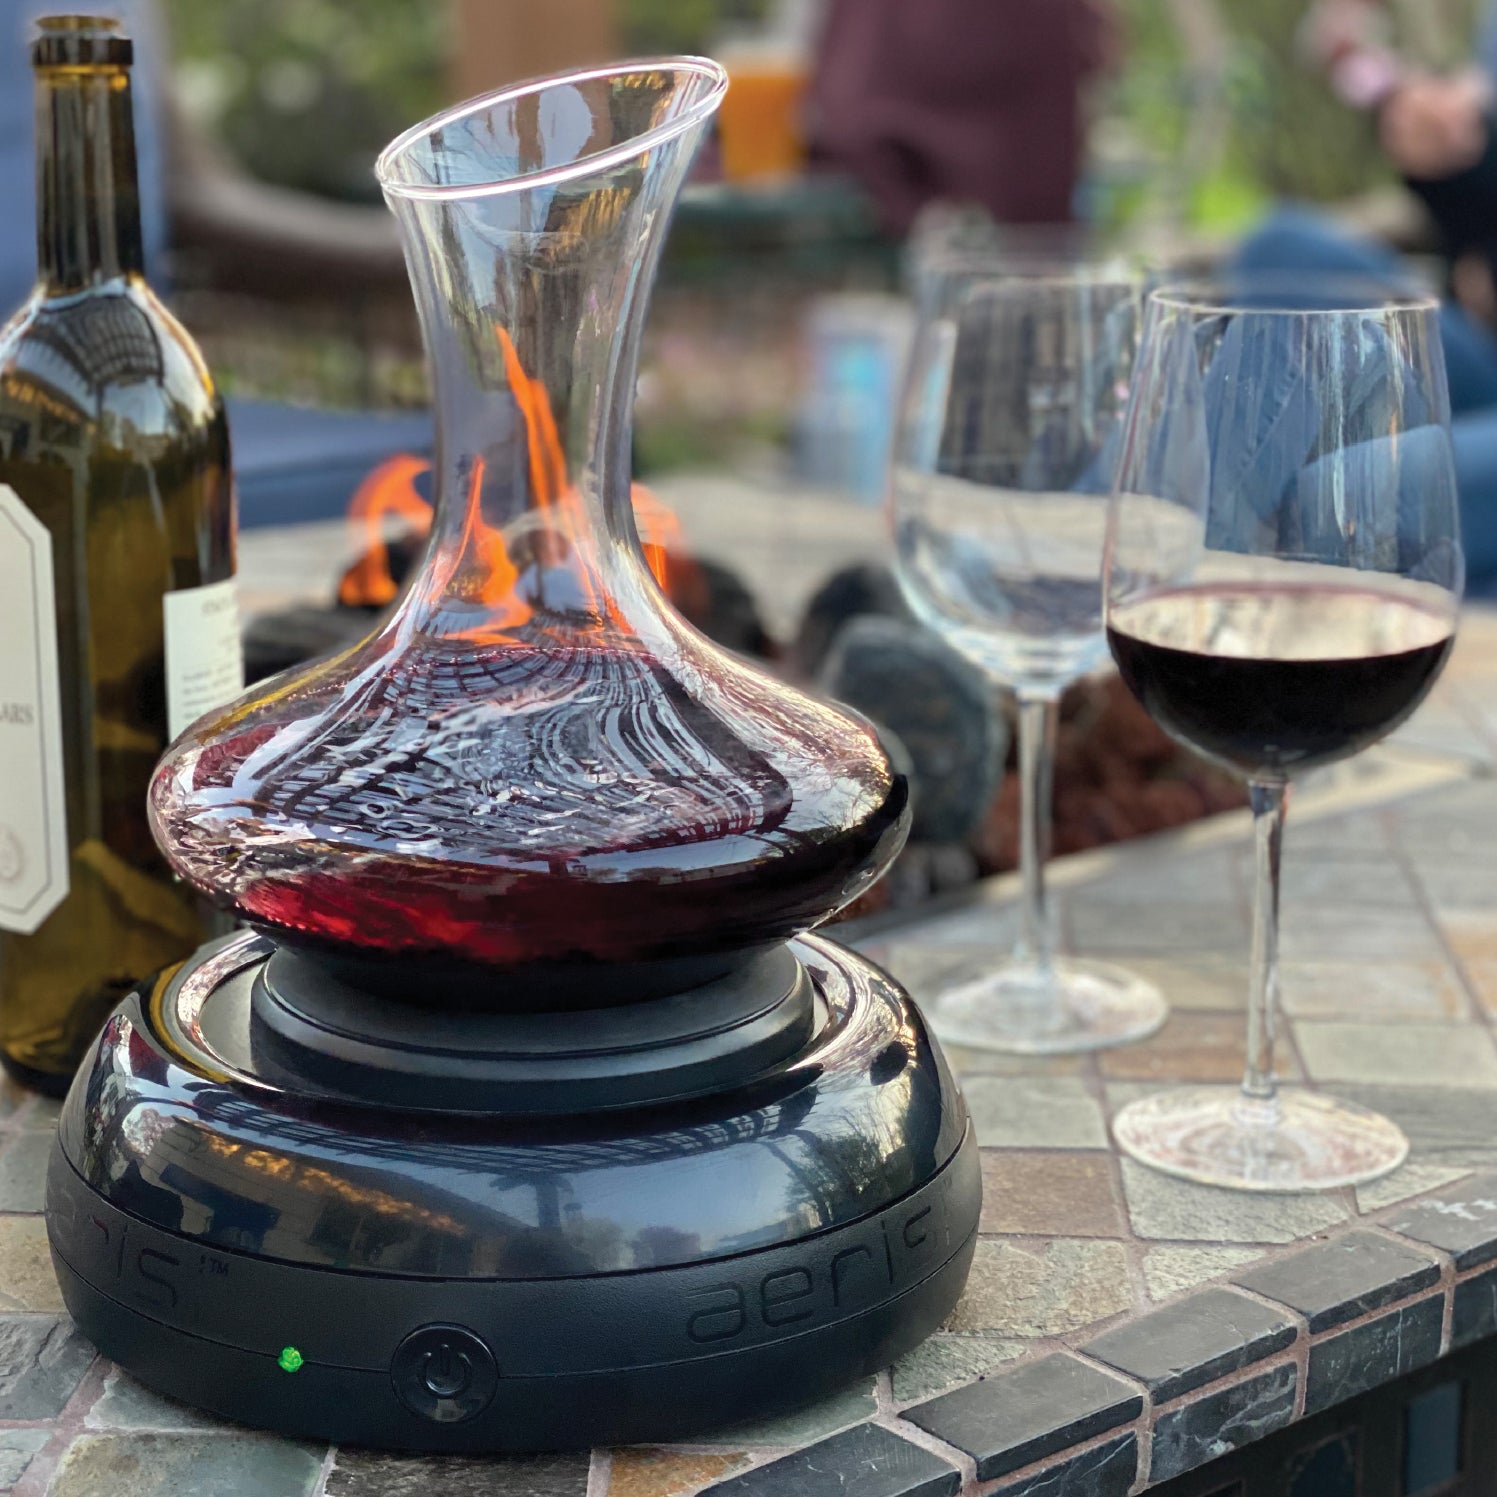 Aerisi Wine Aerator and Decanter with red wine on patio table with firepit